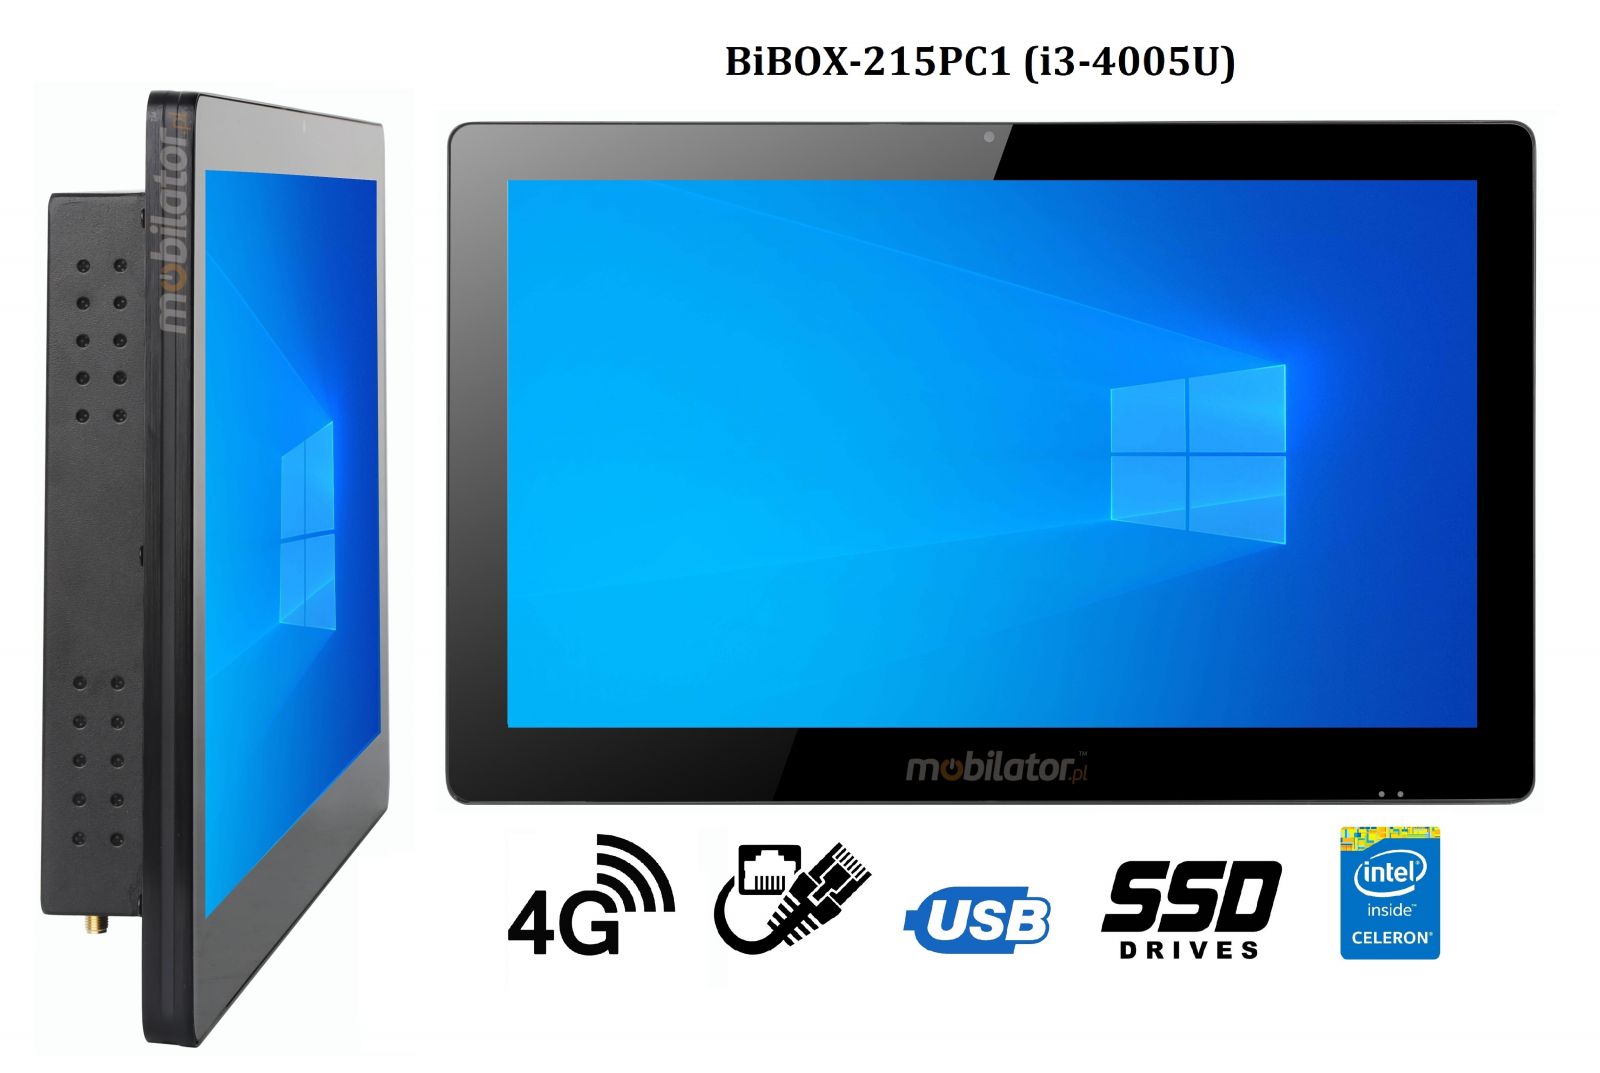 BiBOX-215PC1 (i3-4005U) v.5 - Rugged computer panel with IP65 (water and dust resistance) with 256 GB SSD disk, 4G technology and WiFi